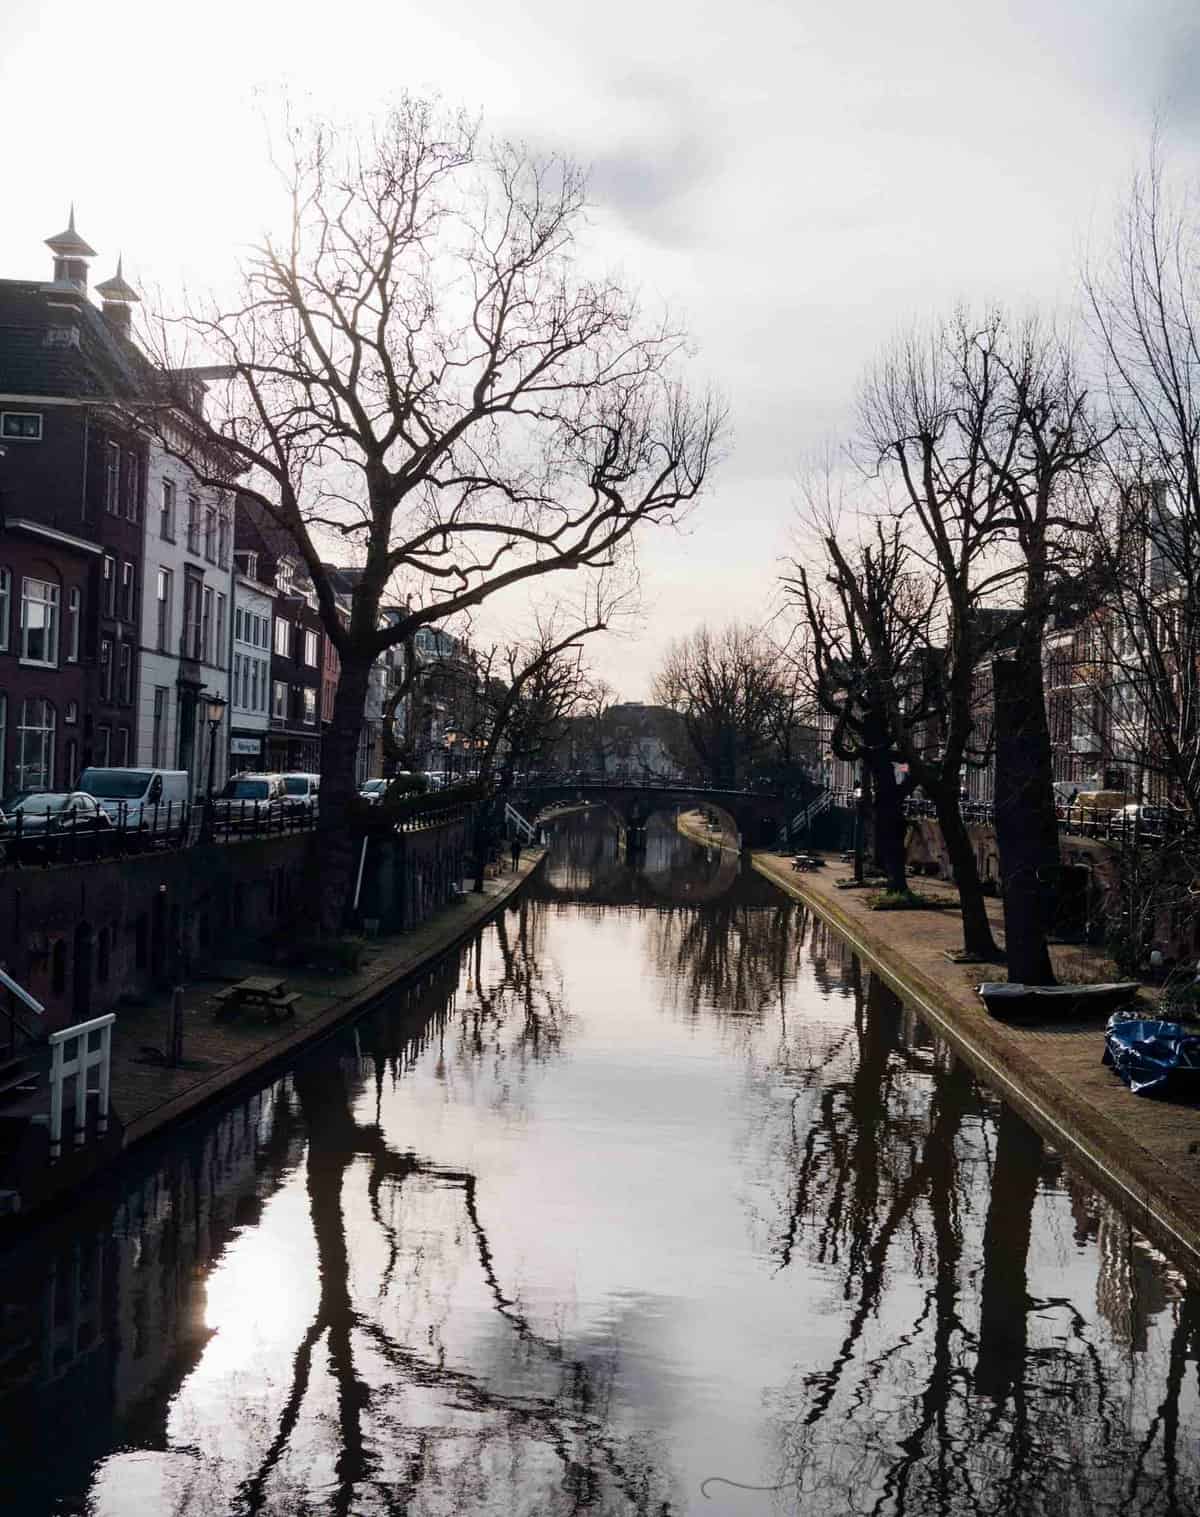 Utrecht, Netherlands is a quaint little scenic city 15 minutes, by train, outside of Amsterdam. It is so scenic and has the cutest cafes. Definitely worth a day trip especially since it's a 15 minute train ride!